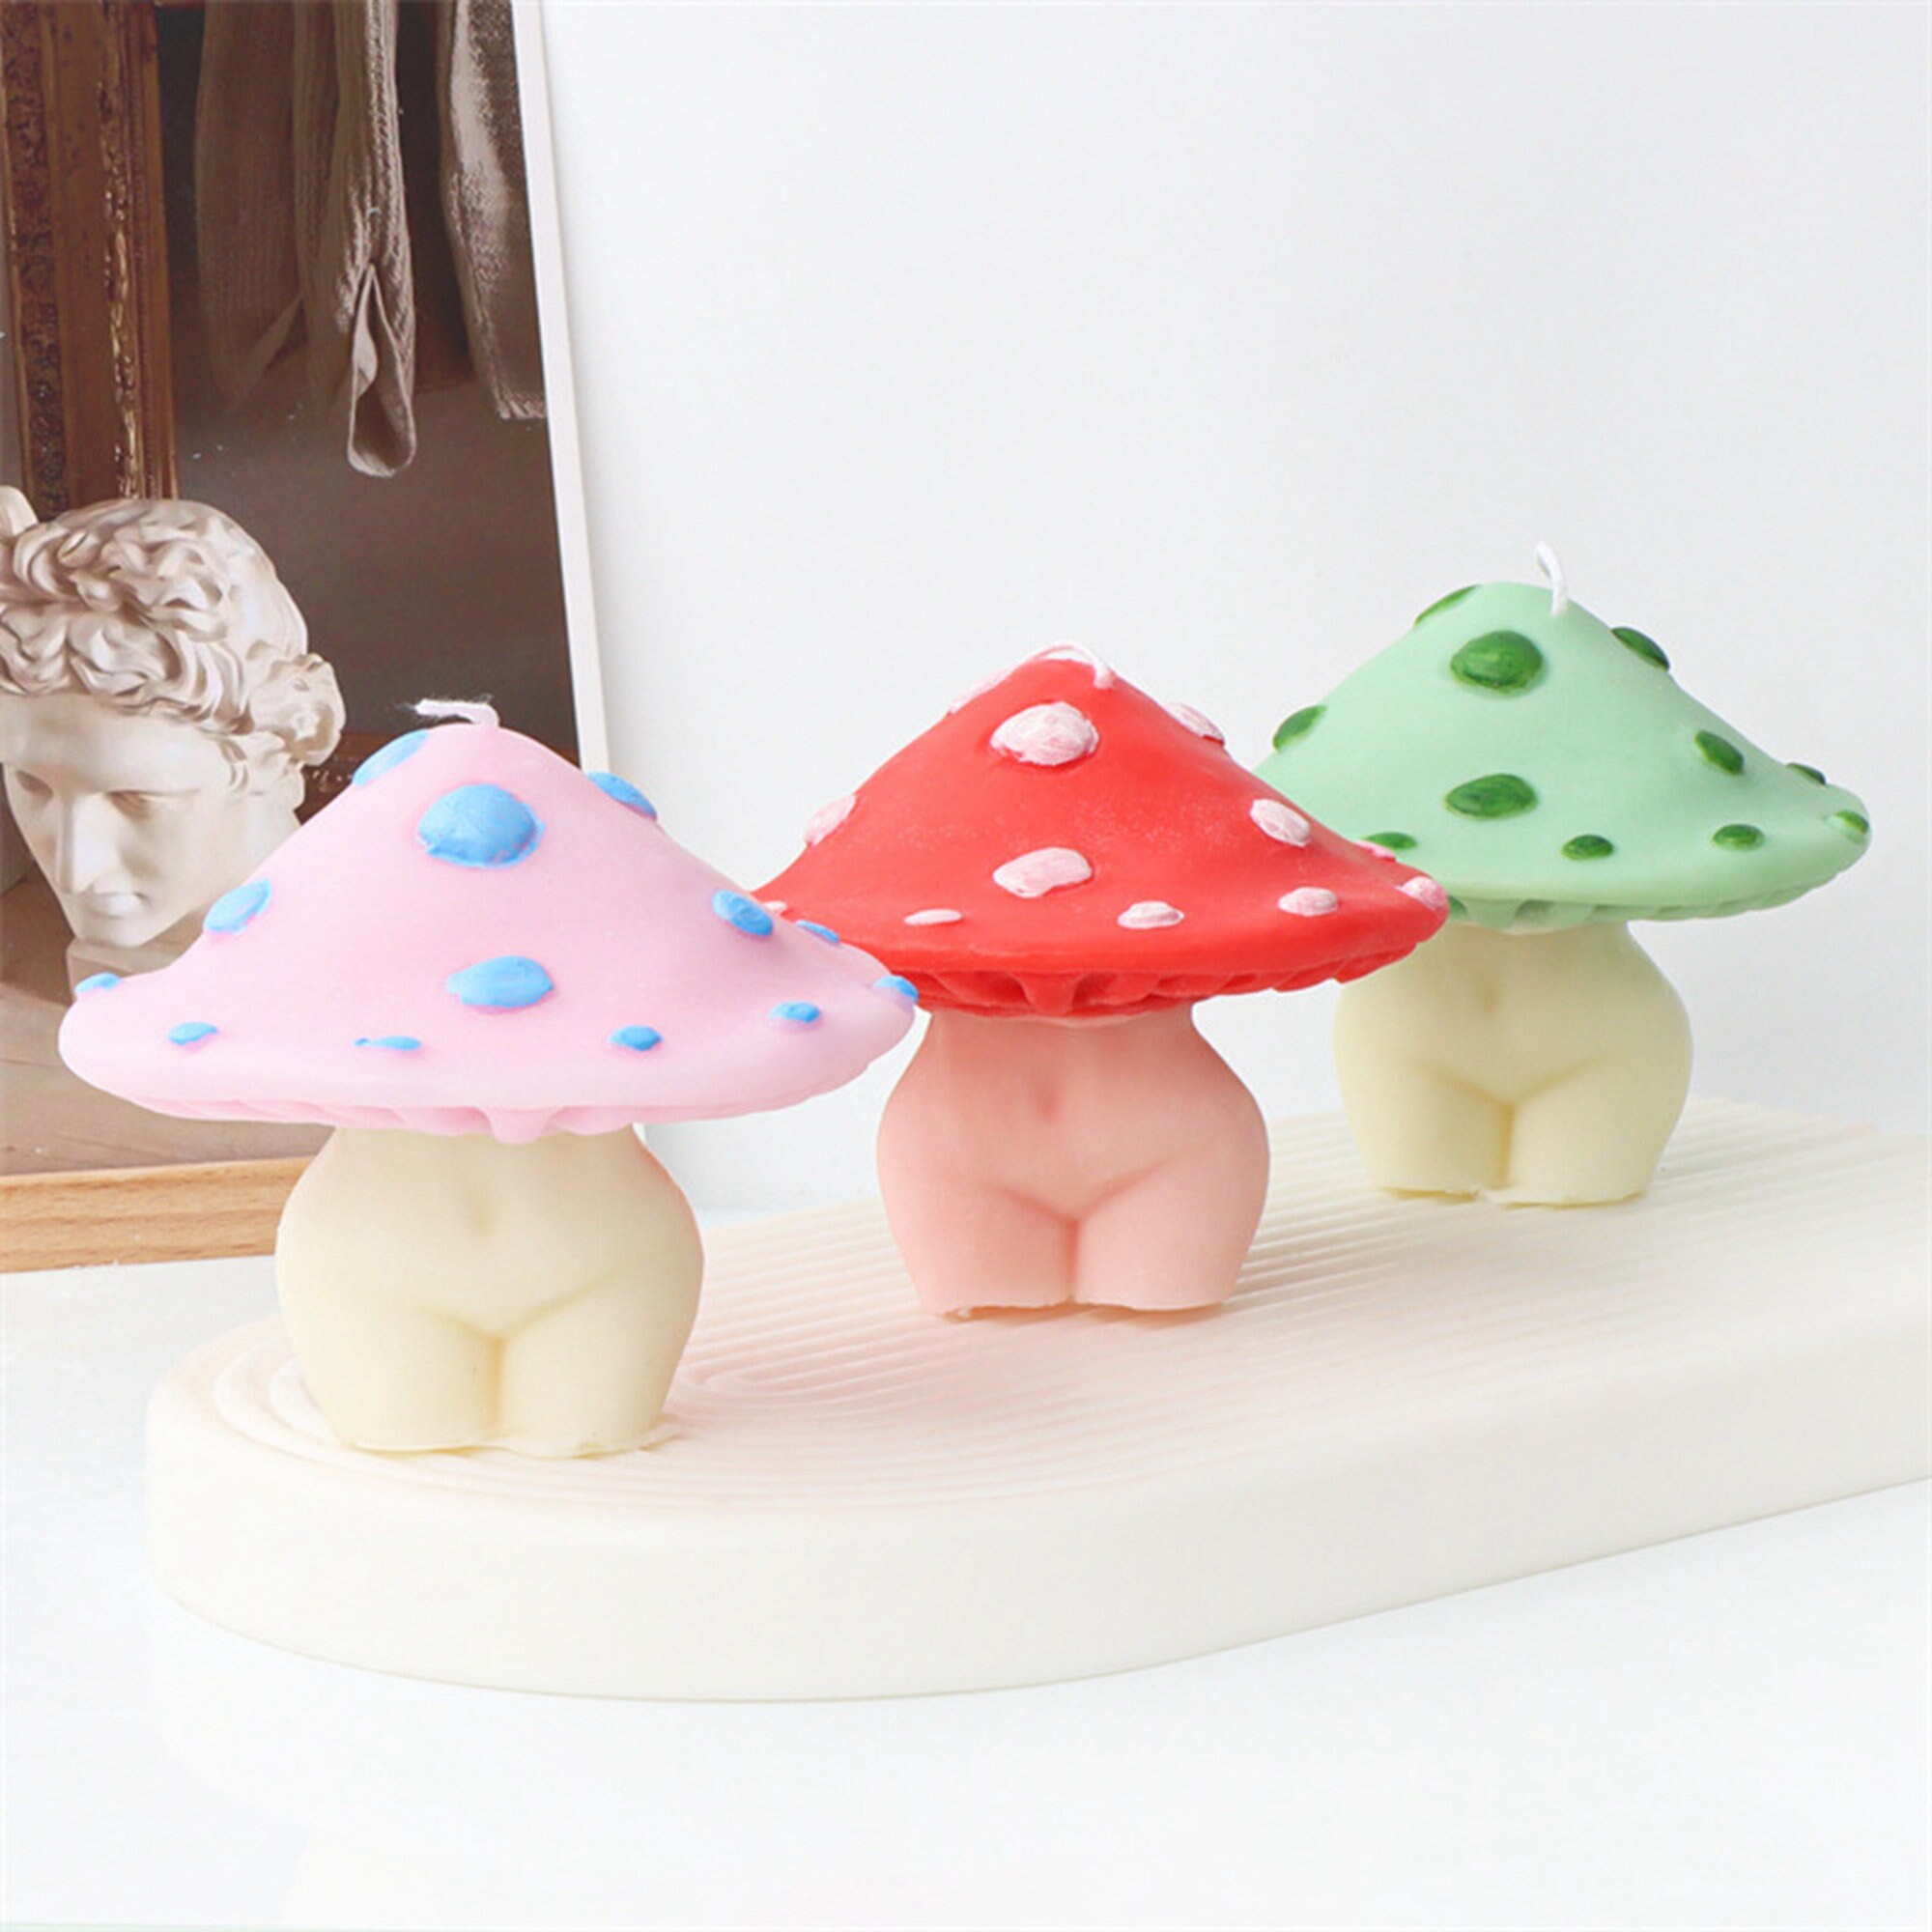 3D Mushroom Resin Molds-silicone Mushroom Mold-home Decor Mold-epoxy Resin  Craft Mould-desk Decoration Mold-molds for Gift Making 